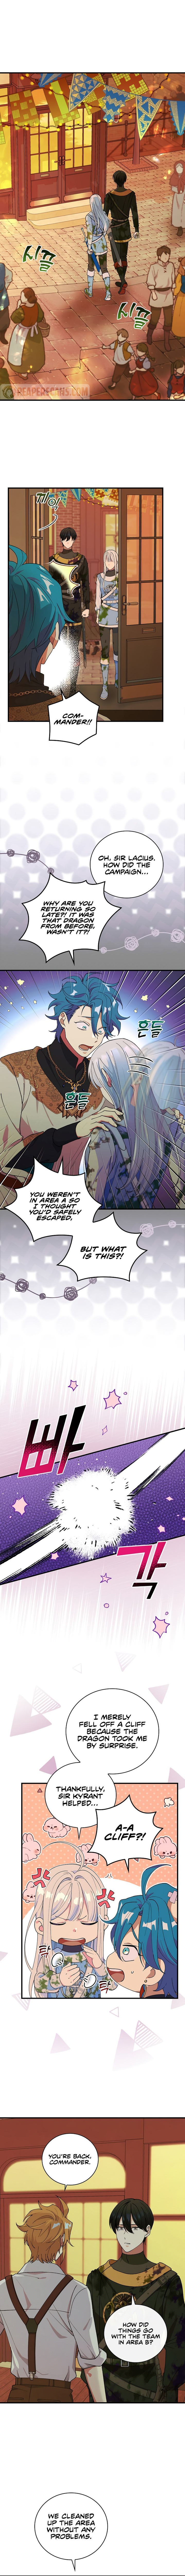 Knight of the Frozen Flower Chapter 45 page 2 - MangaWeebs.in